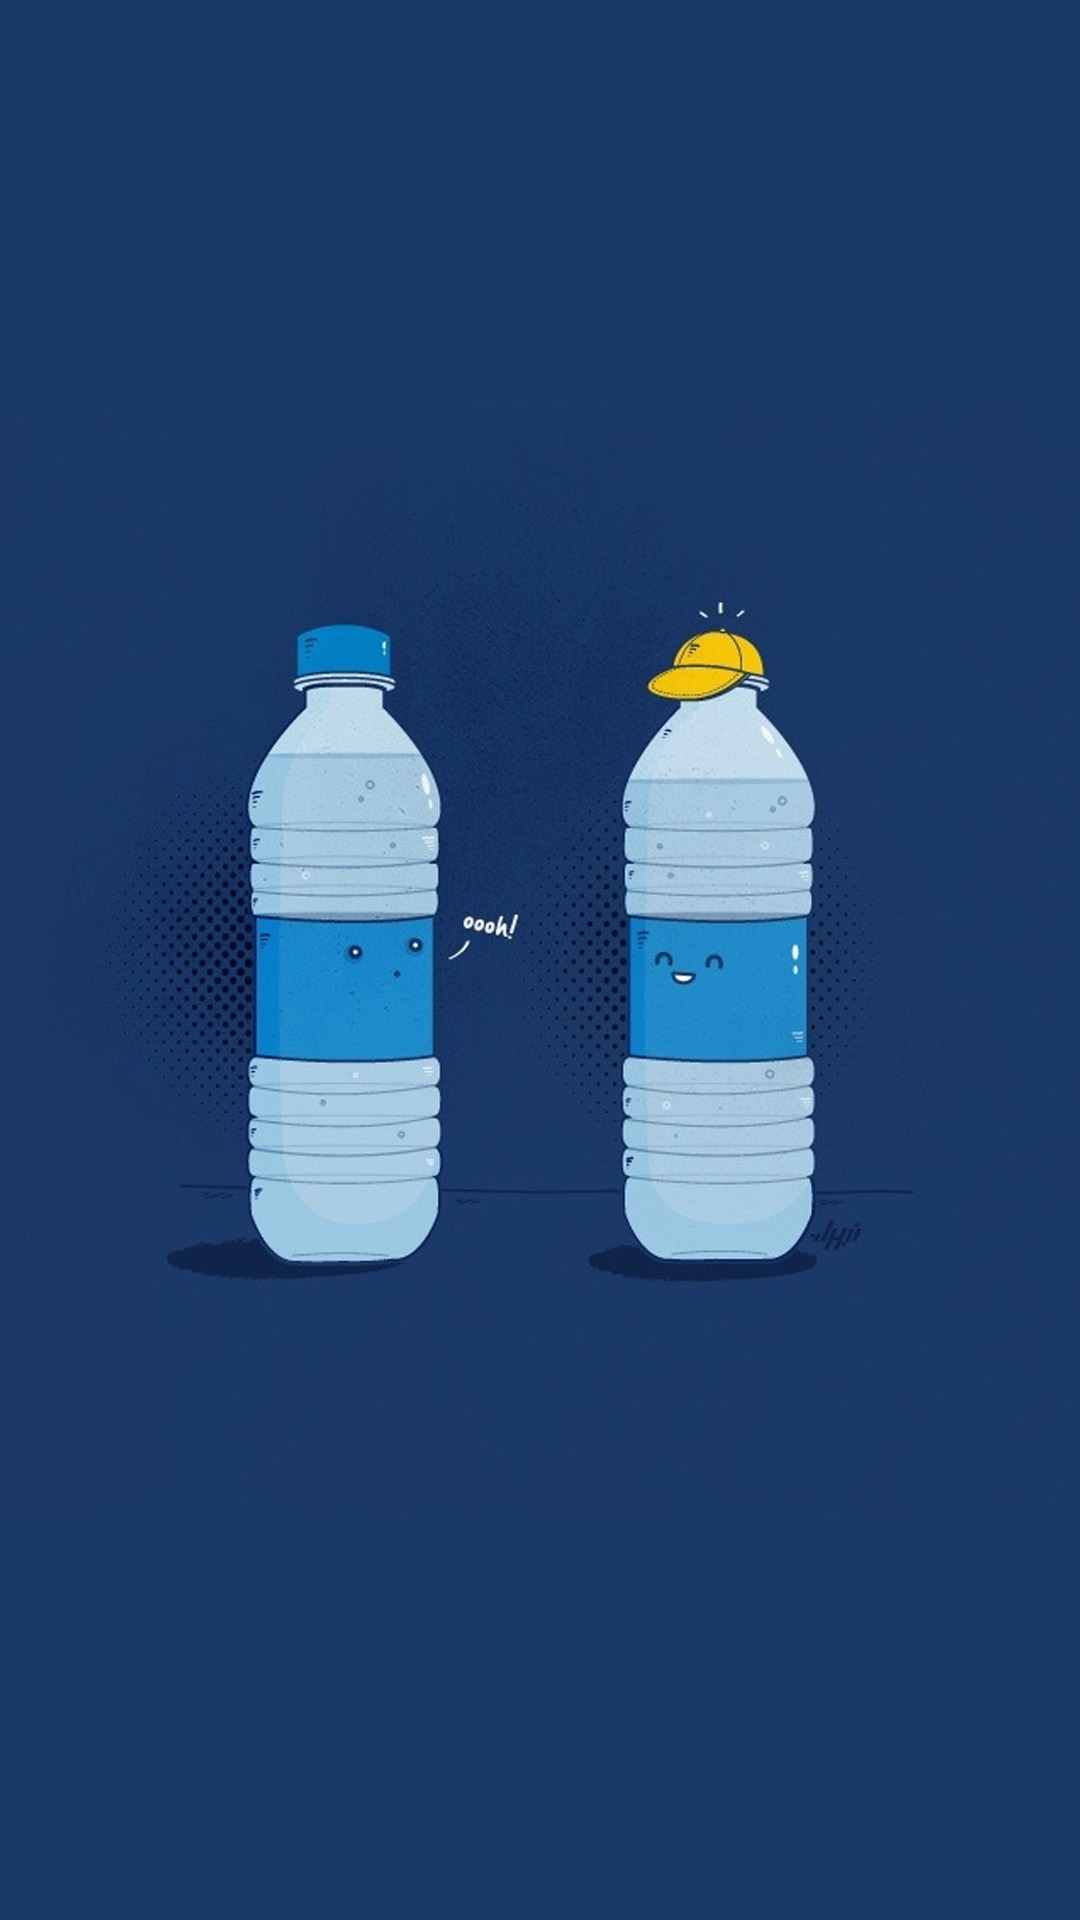 Funny 125 Android Wallpaper - Cartoon Water Bottle - 1080x1920 Wallpaper -  